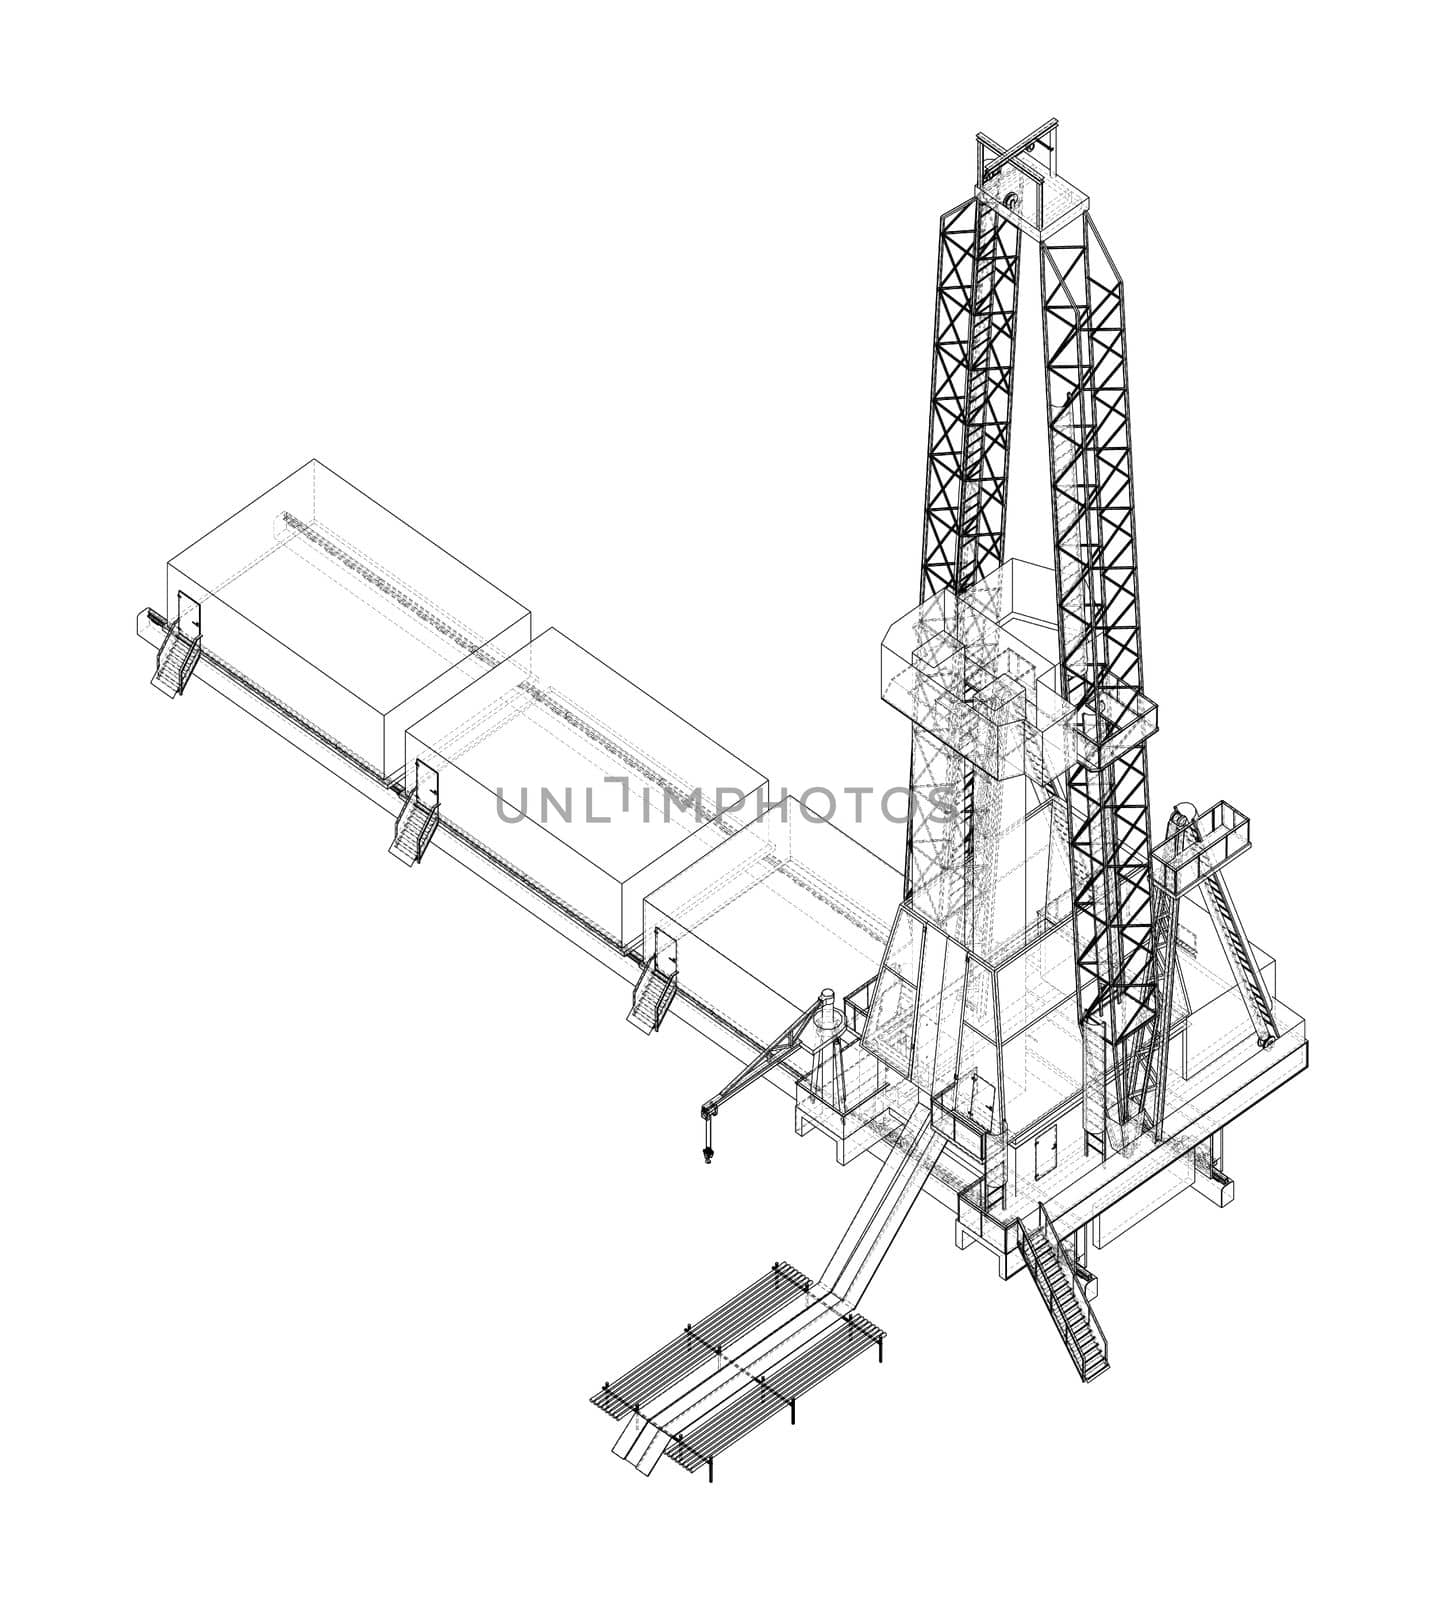 Oil rig. Orthography by cherezoff